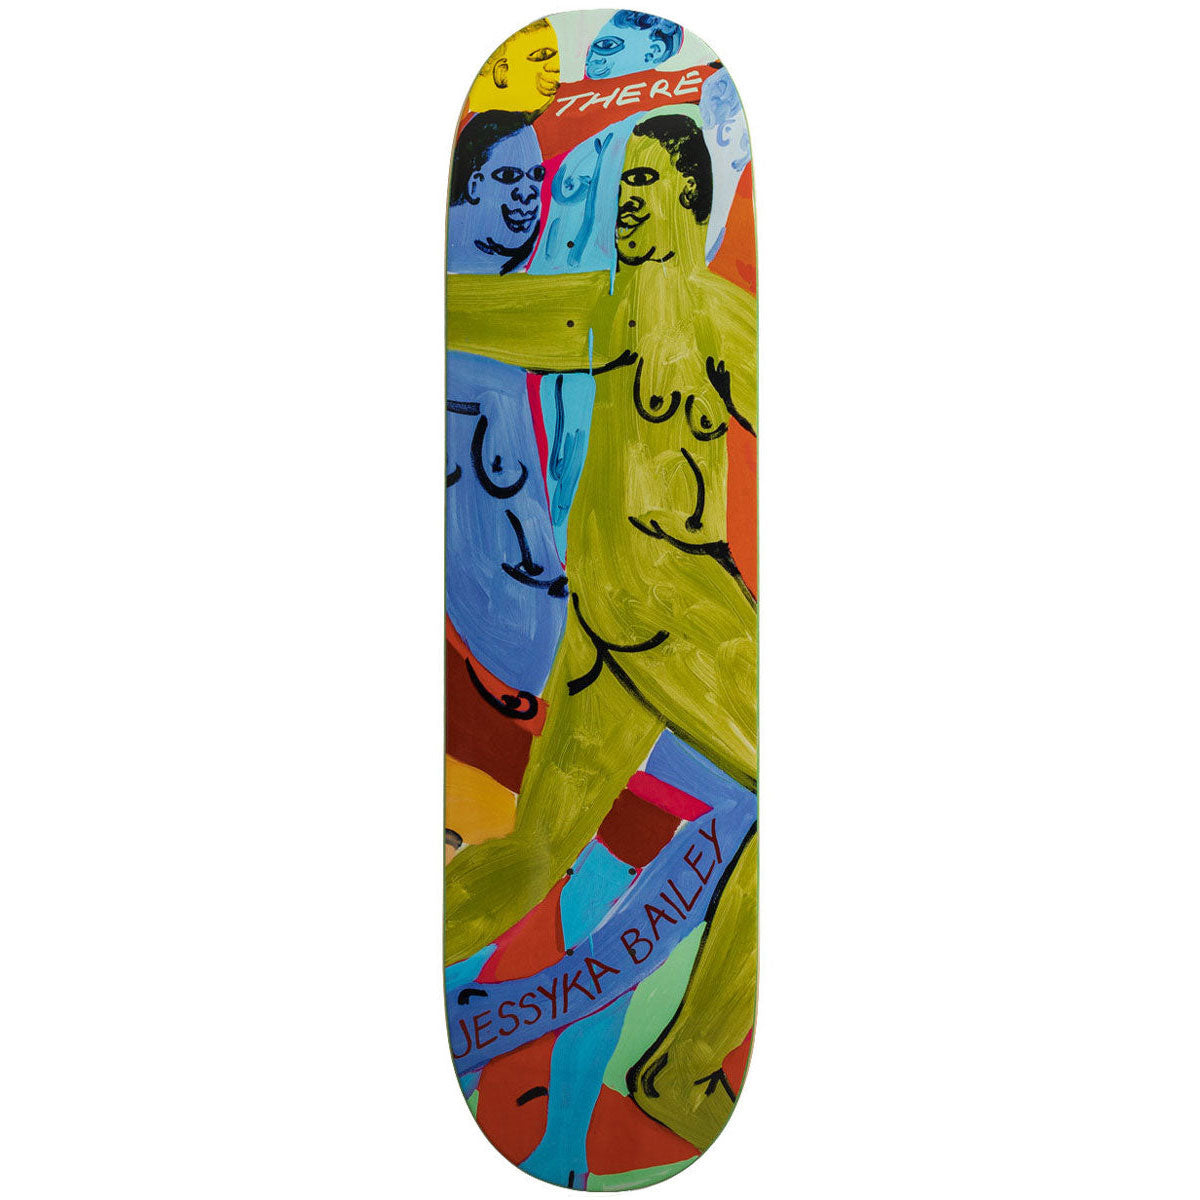 There Jessyka In Ur Face Deck 8.25"